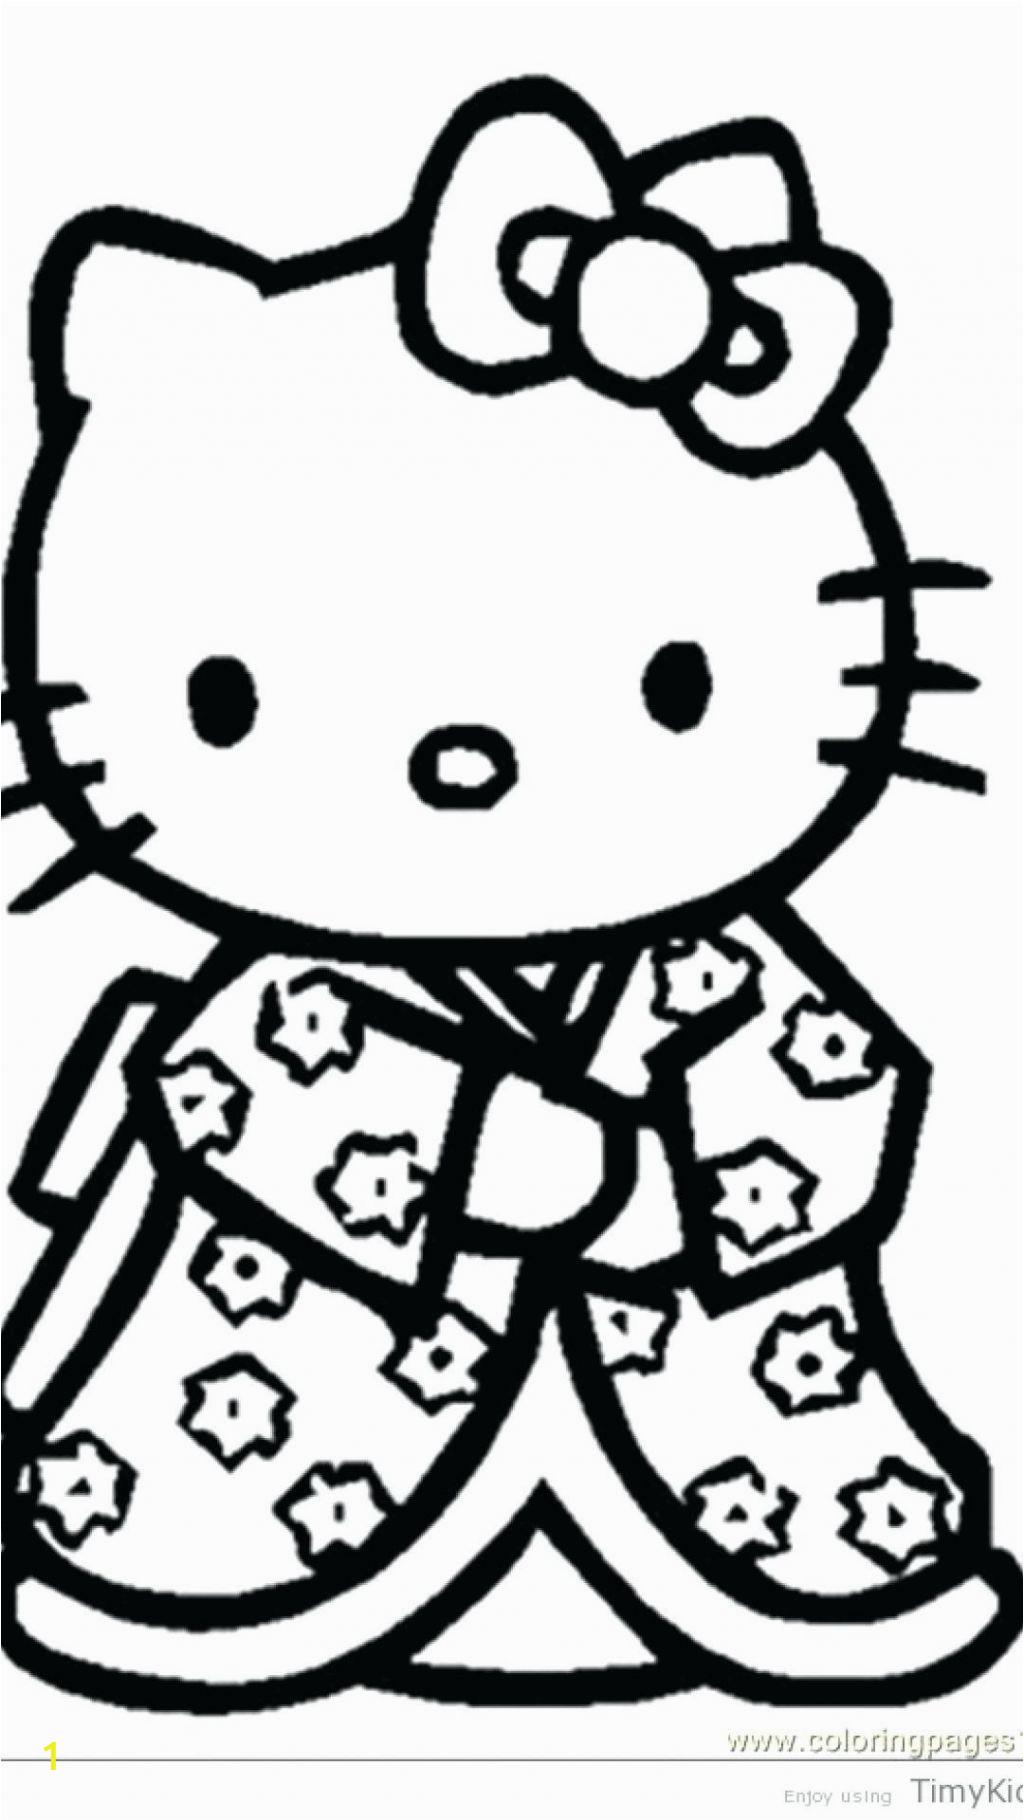 Hello Kitty Angel Coloring Pages Coloring Pages Hello Kitty Mermaid Coloring Pages Hello